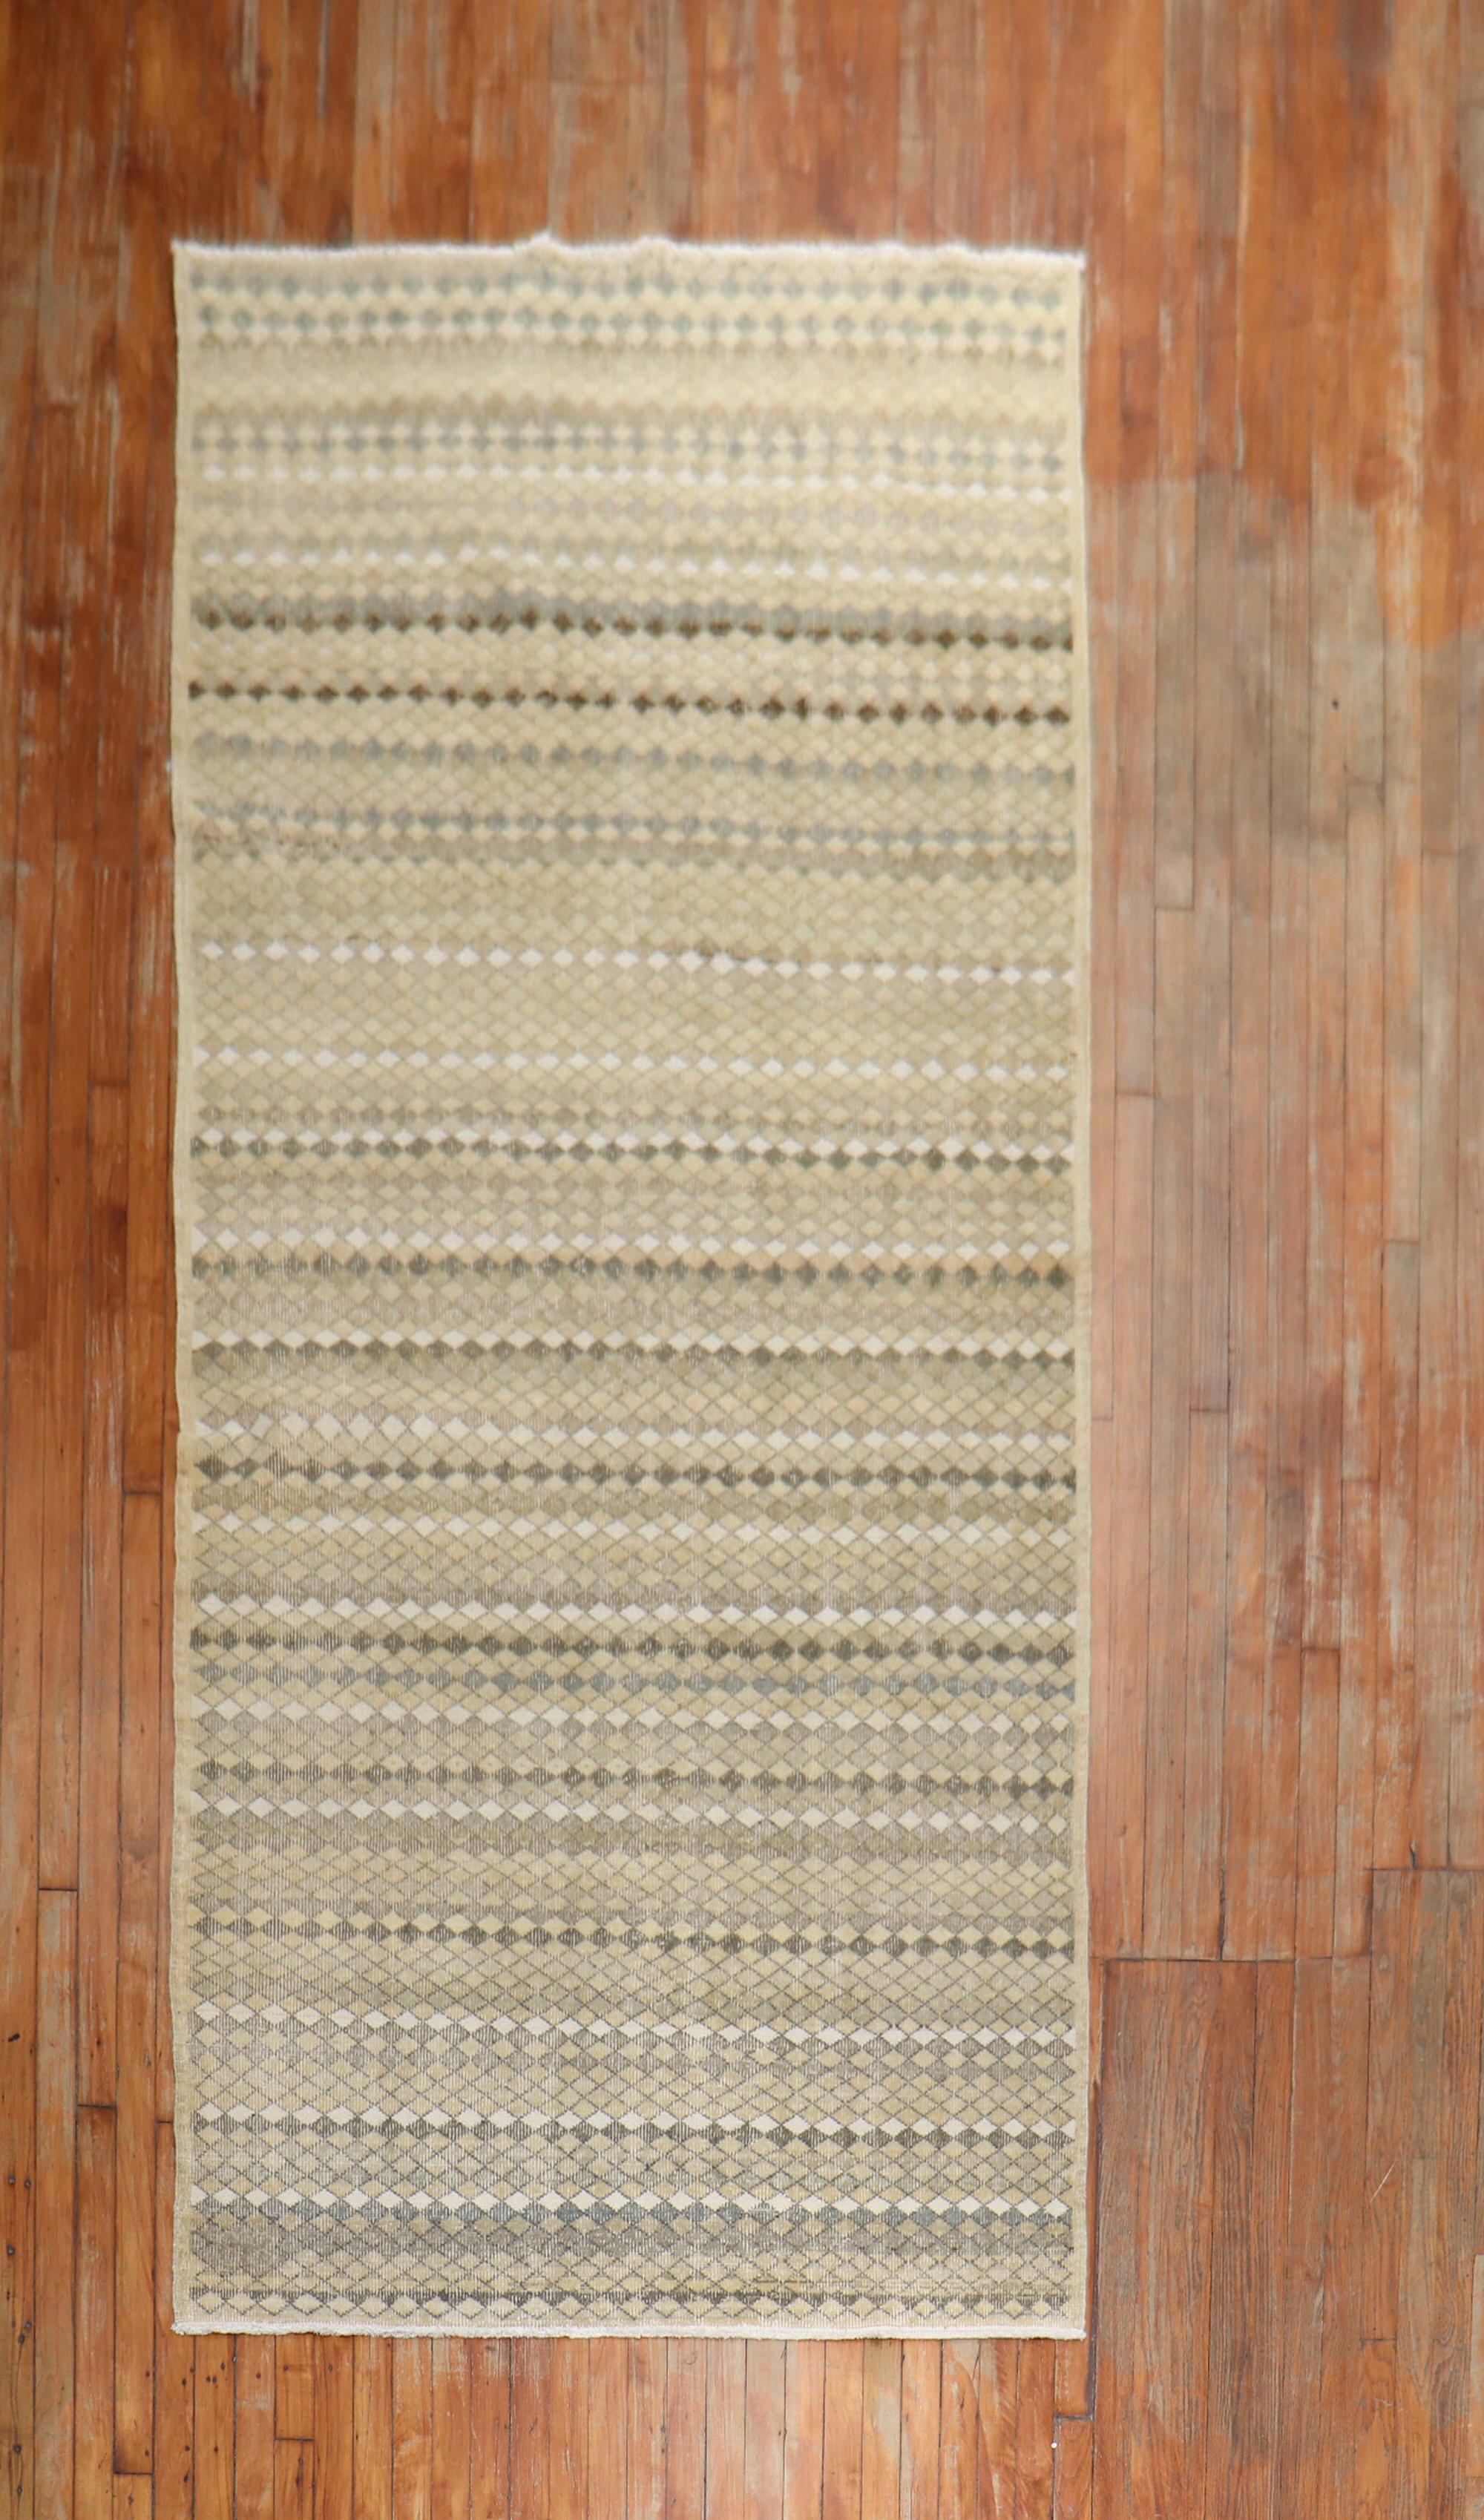 Neutral color vintage one of a kind wide Turkish Deco gallery runner with an all-over diamond motif A chic piece, circa mid-20th century.

Measures: 4'5” x 11'4”.